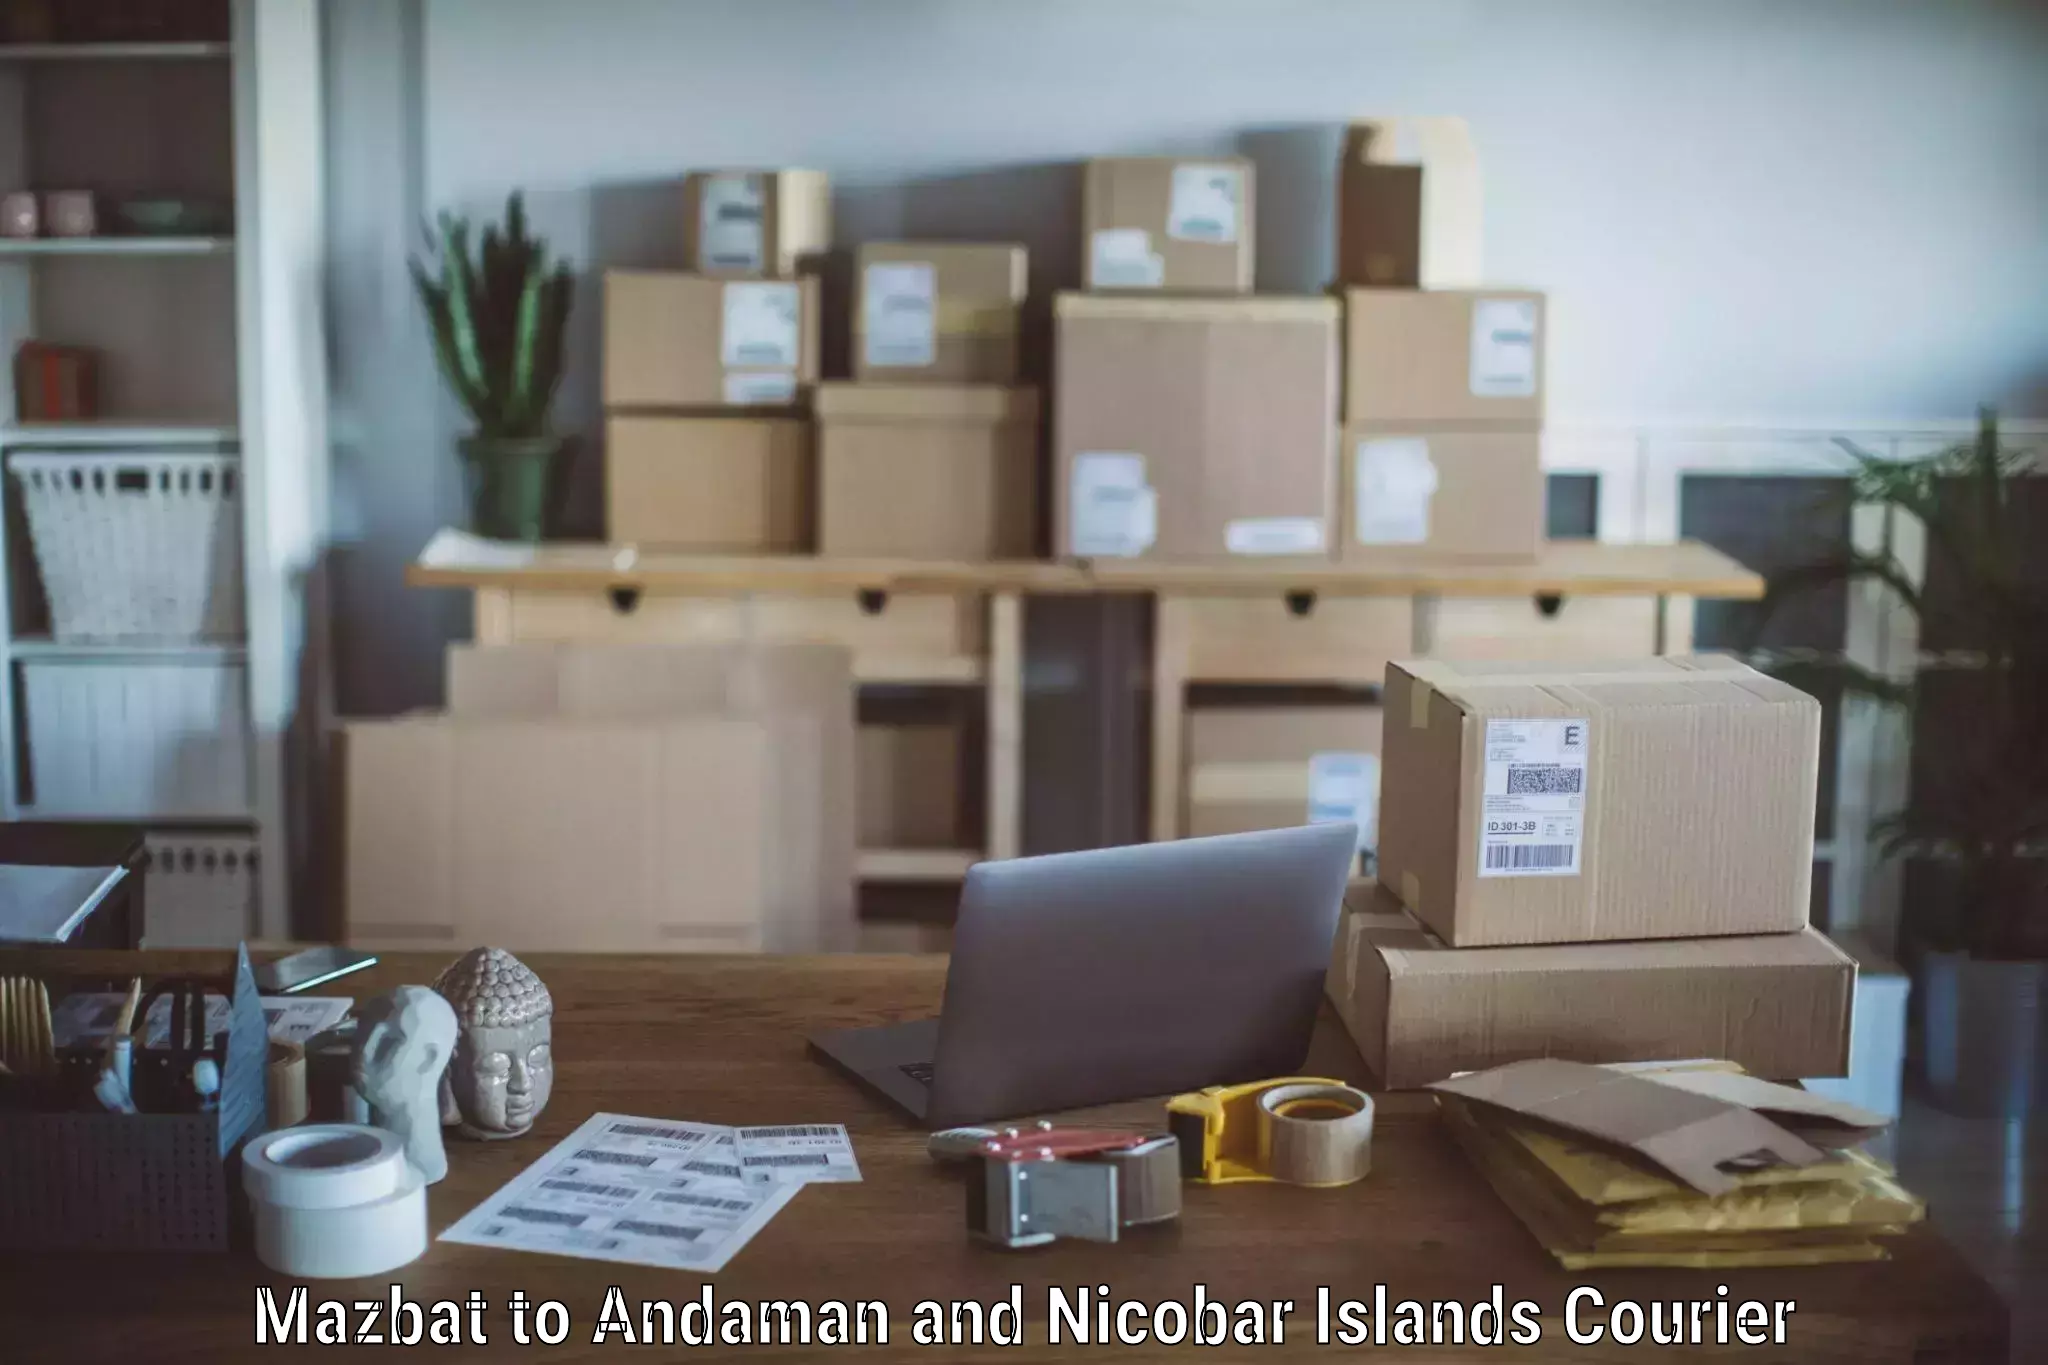 Professional relocation services Mazbat to Andaman and Nicobar Islands